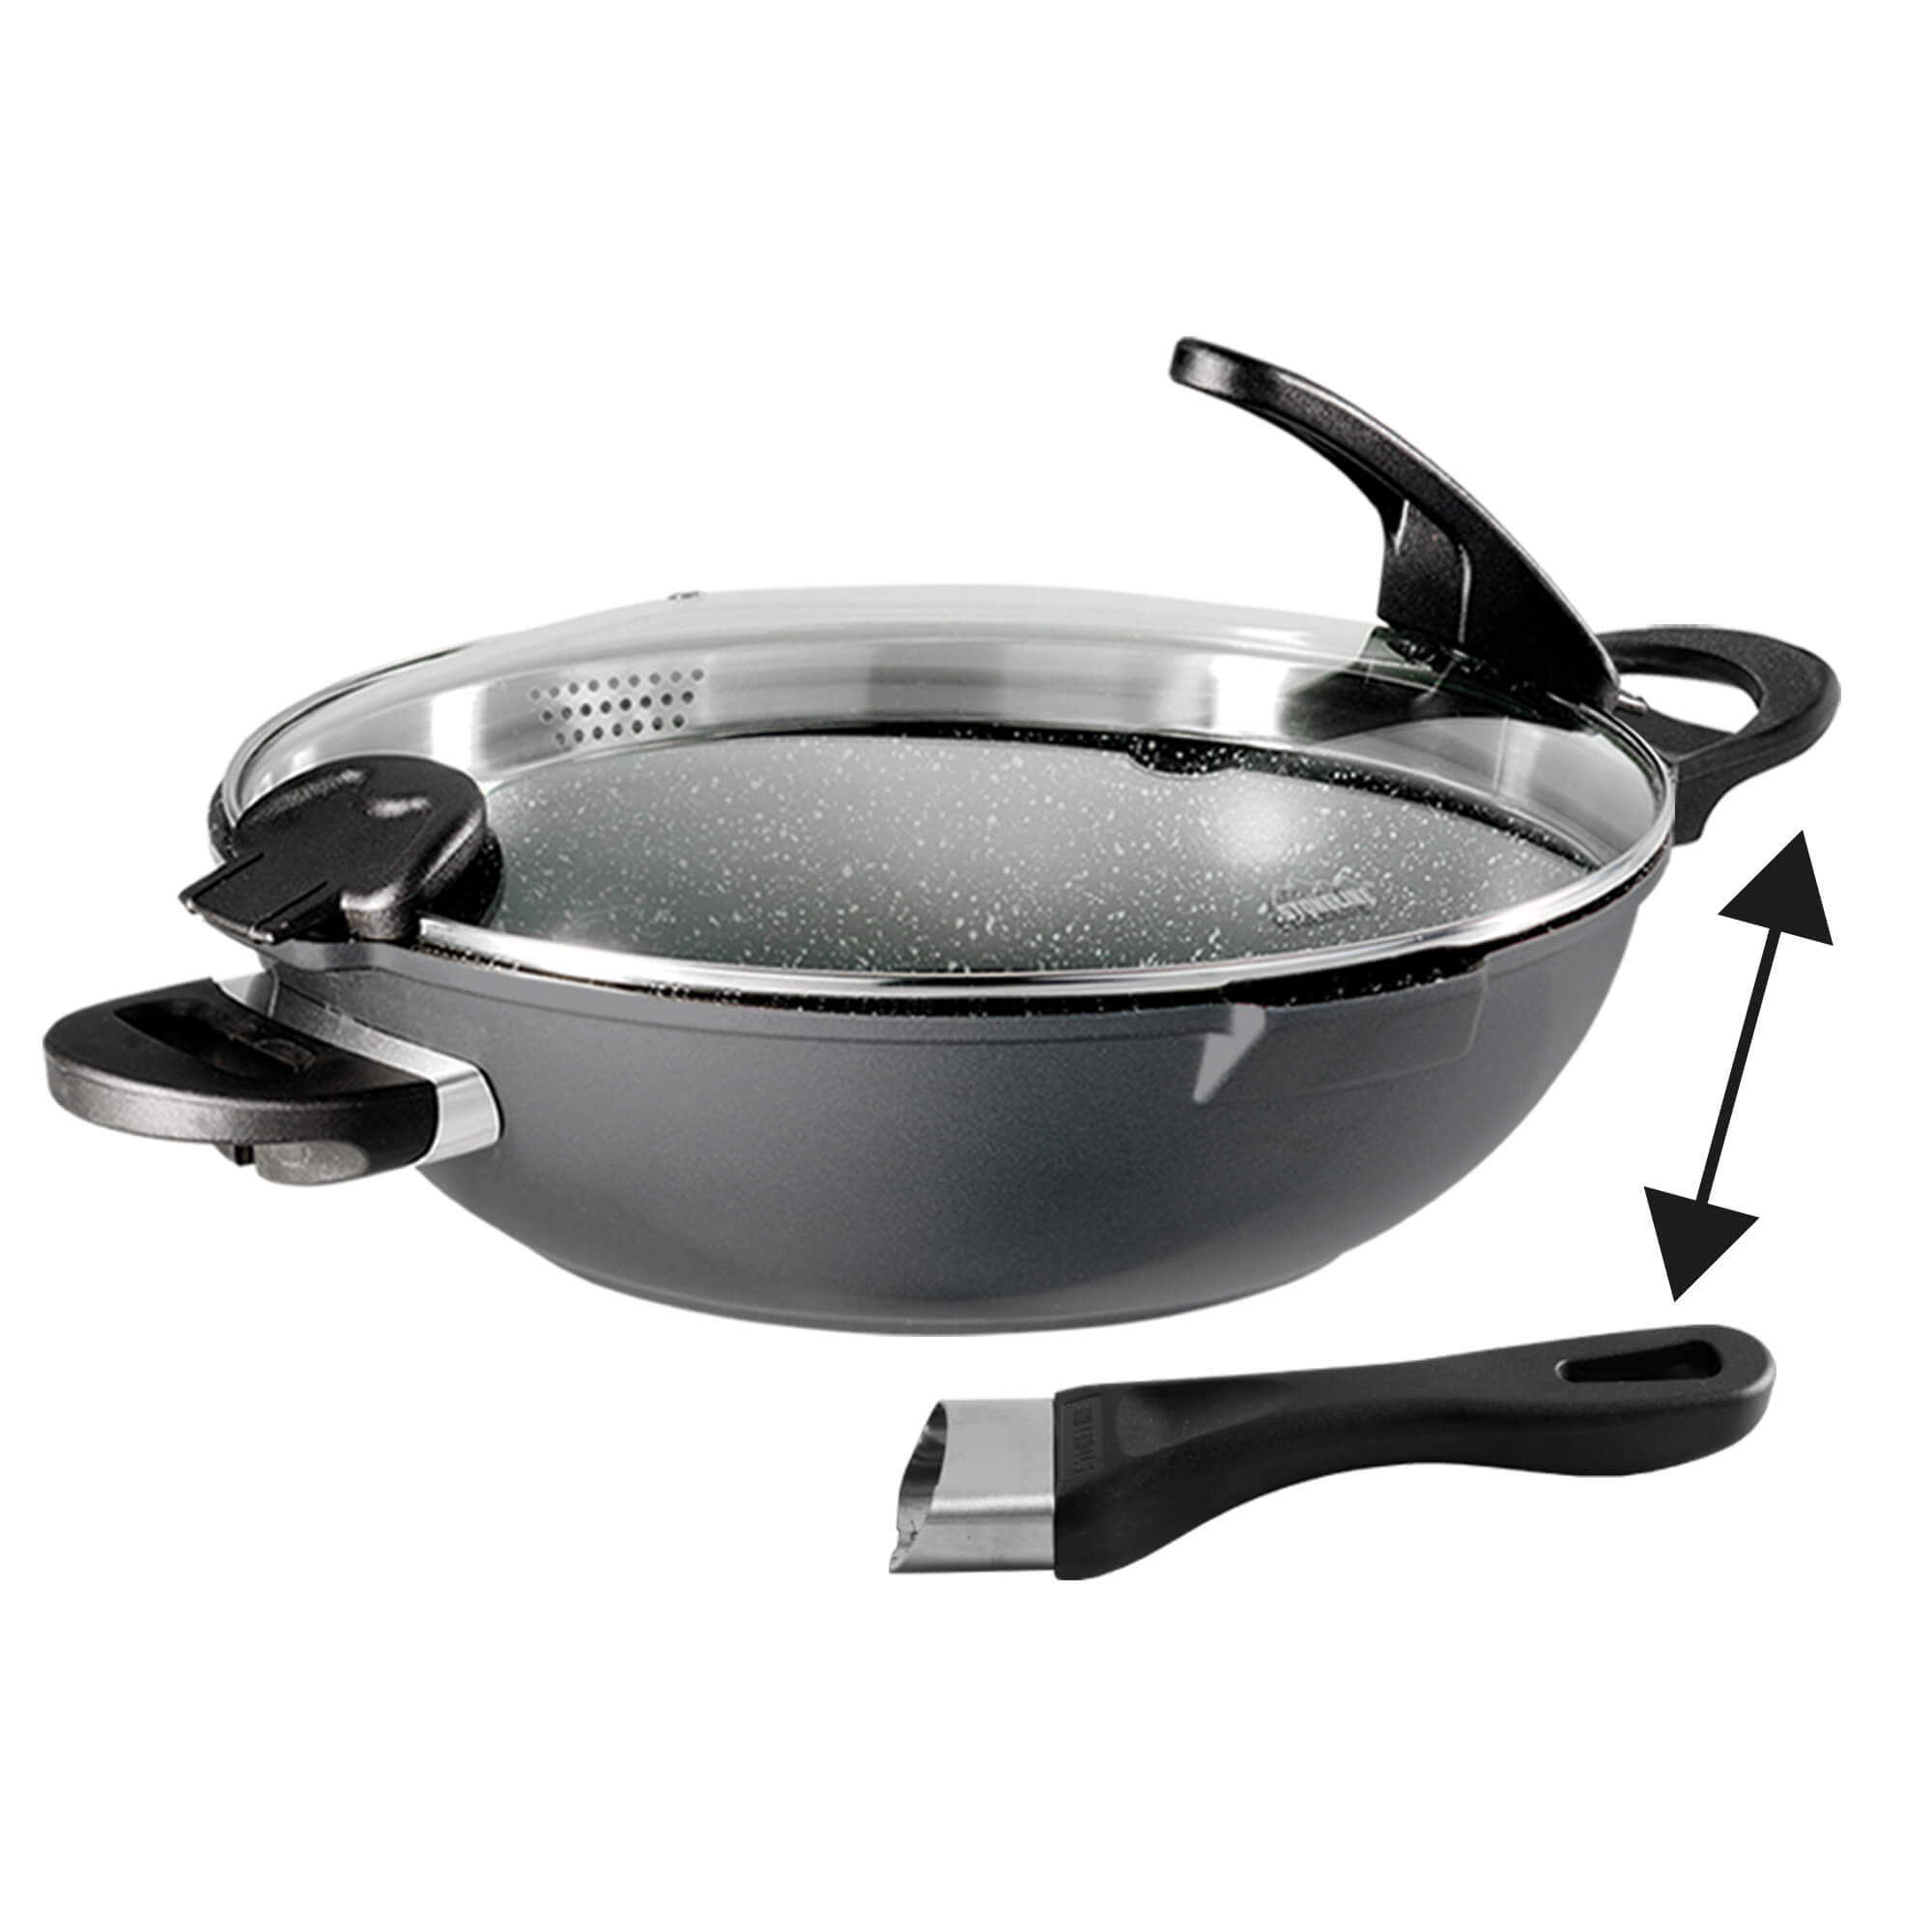 FUTURE Wok 32 cm with - Sieve Stick | Non handles Stoneline Cookware Lid Glass Kitchenware and exchangeable